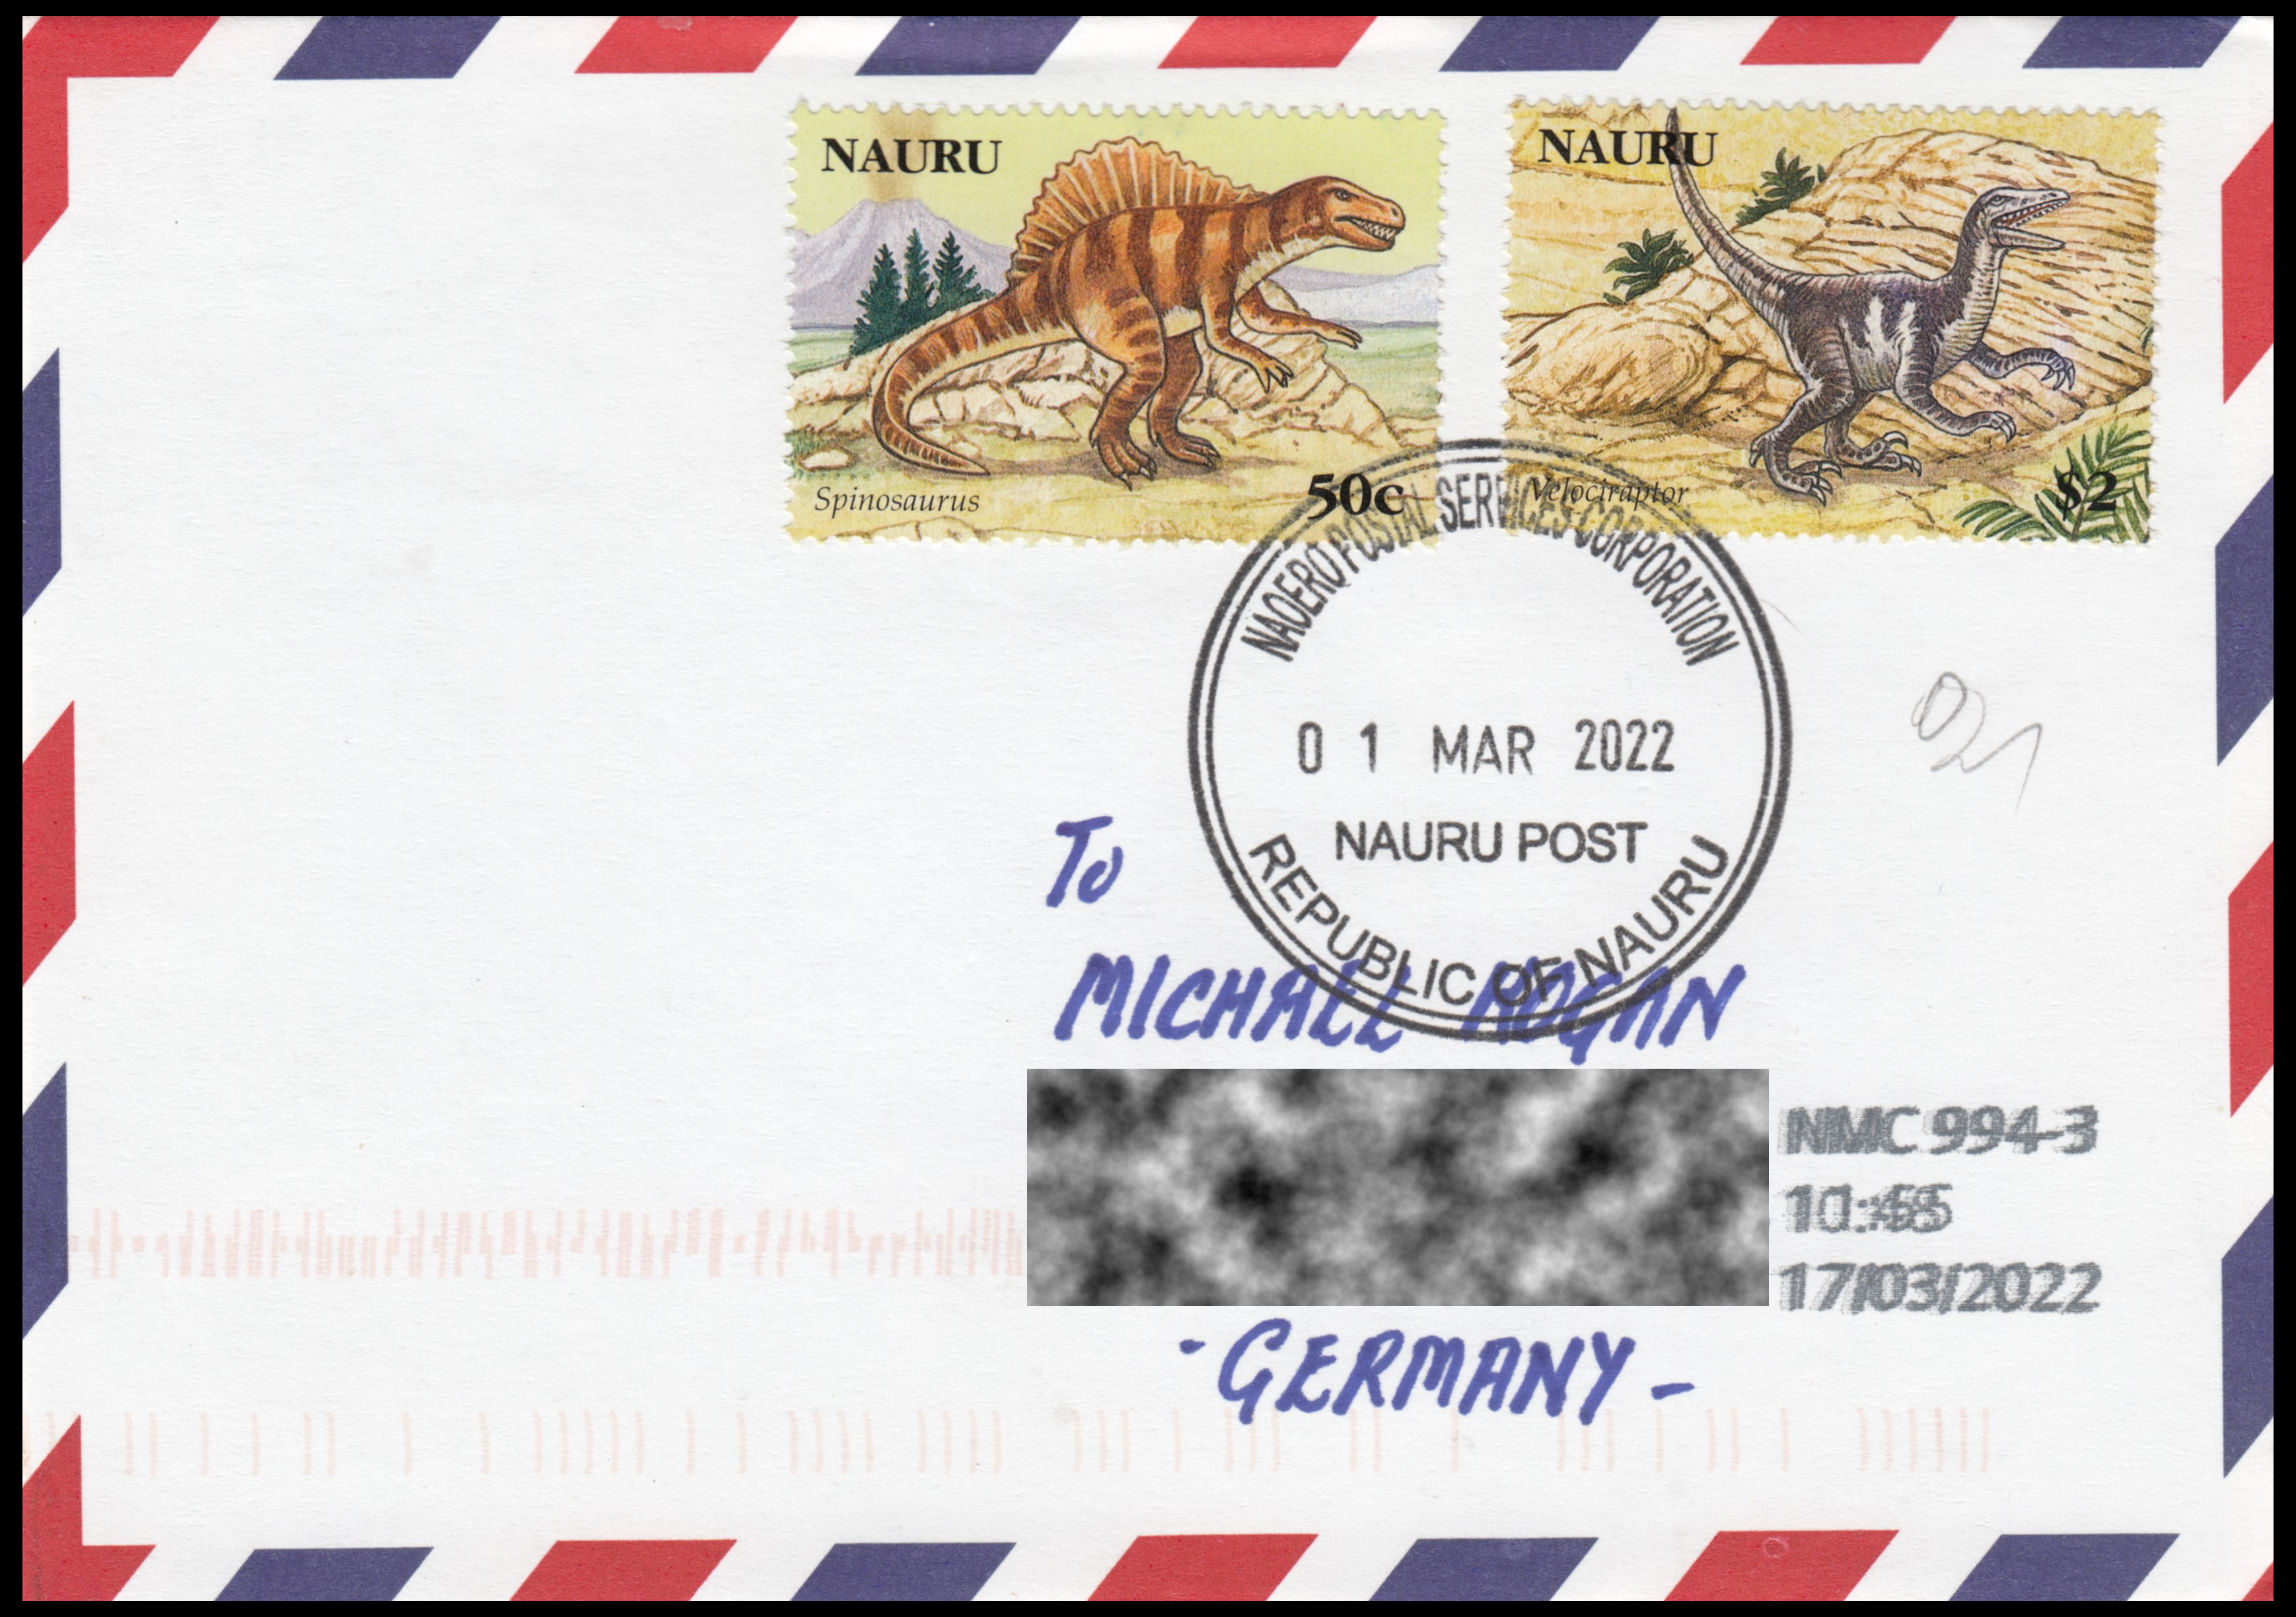 Dinosaur stamps on letter from Nauru to Germany